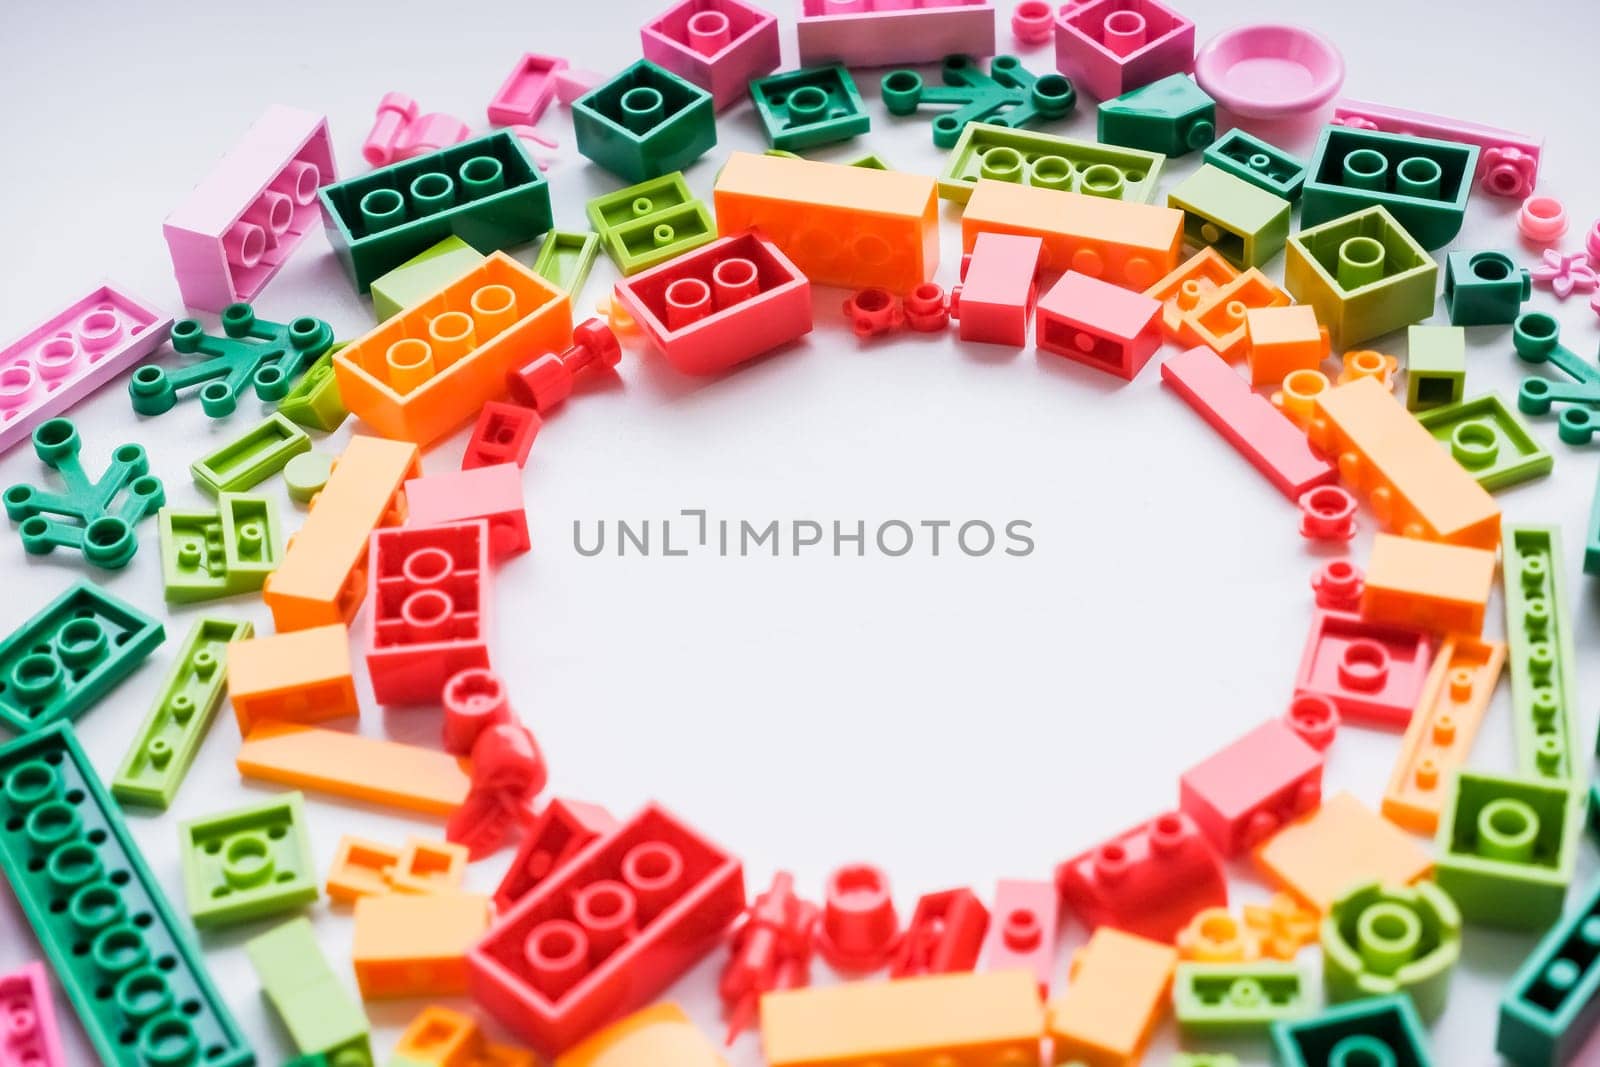 Plastic building blocks pattern background, Colorful toy bricks for kid, Top view